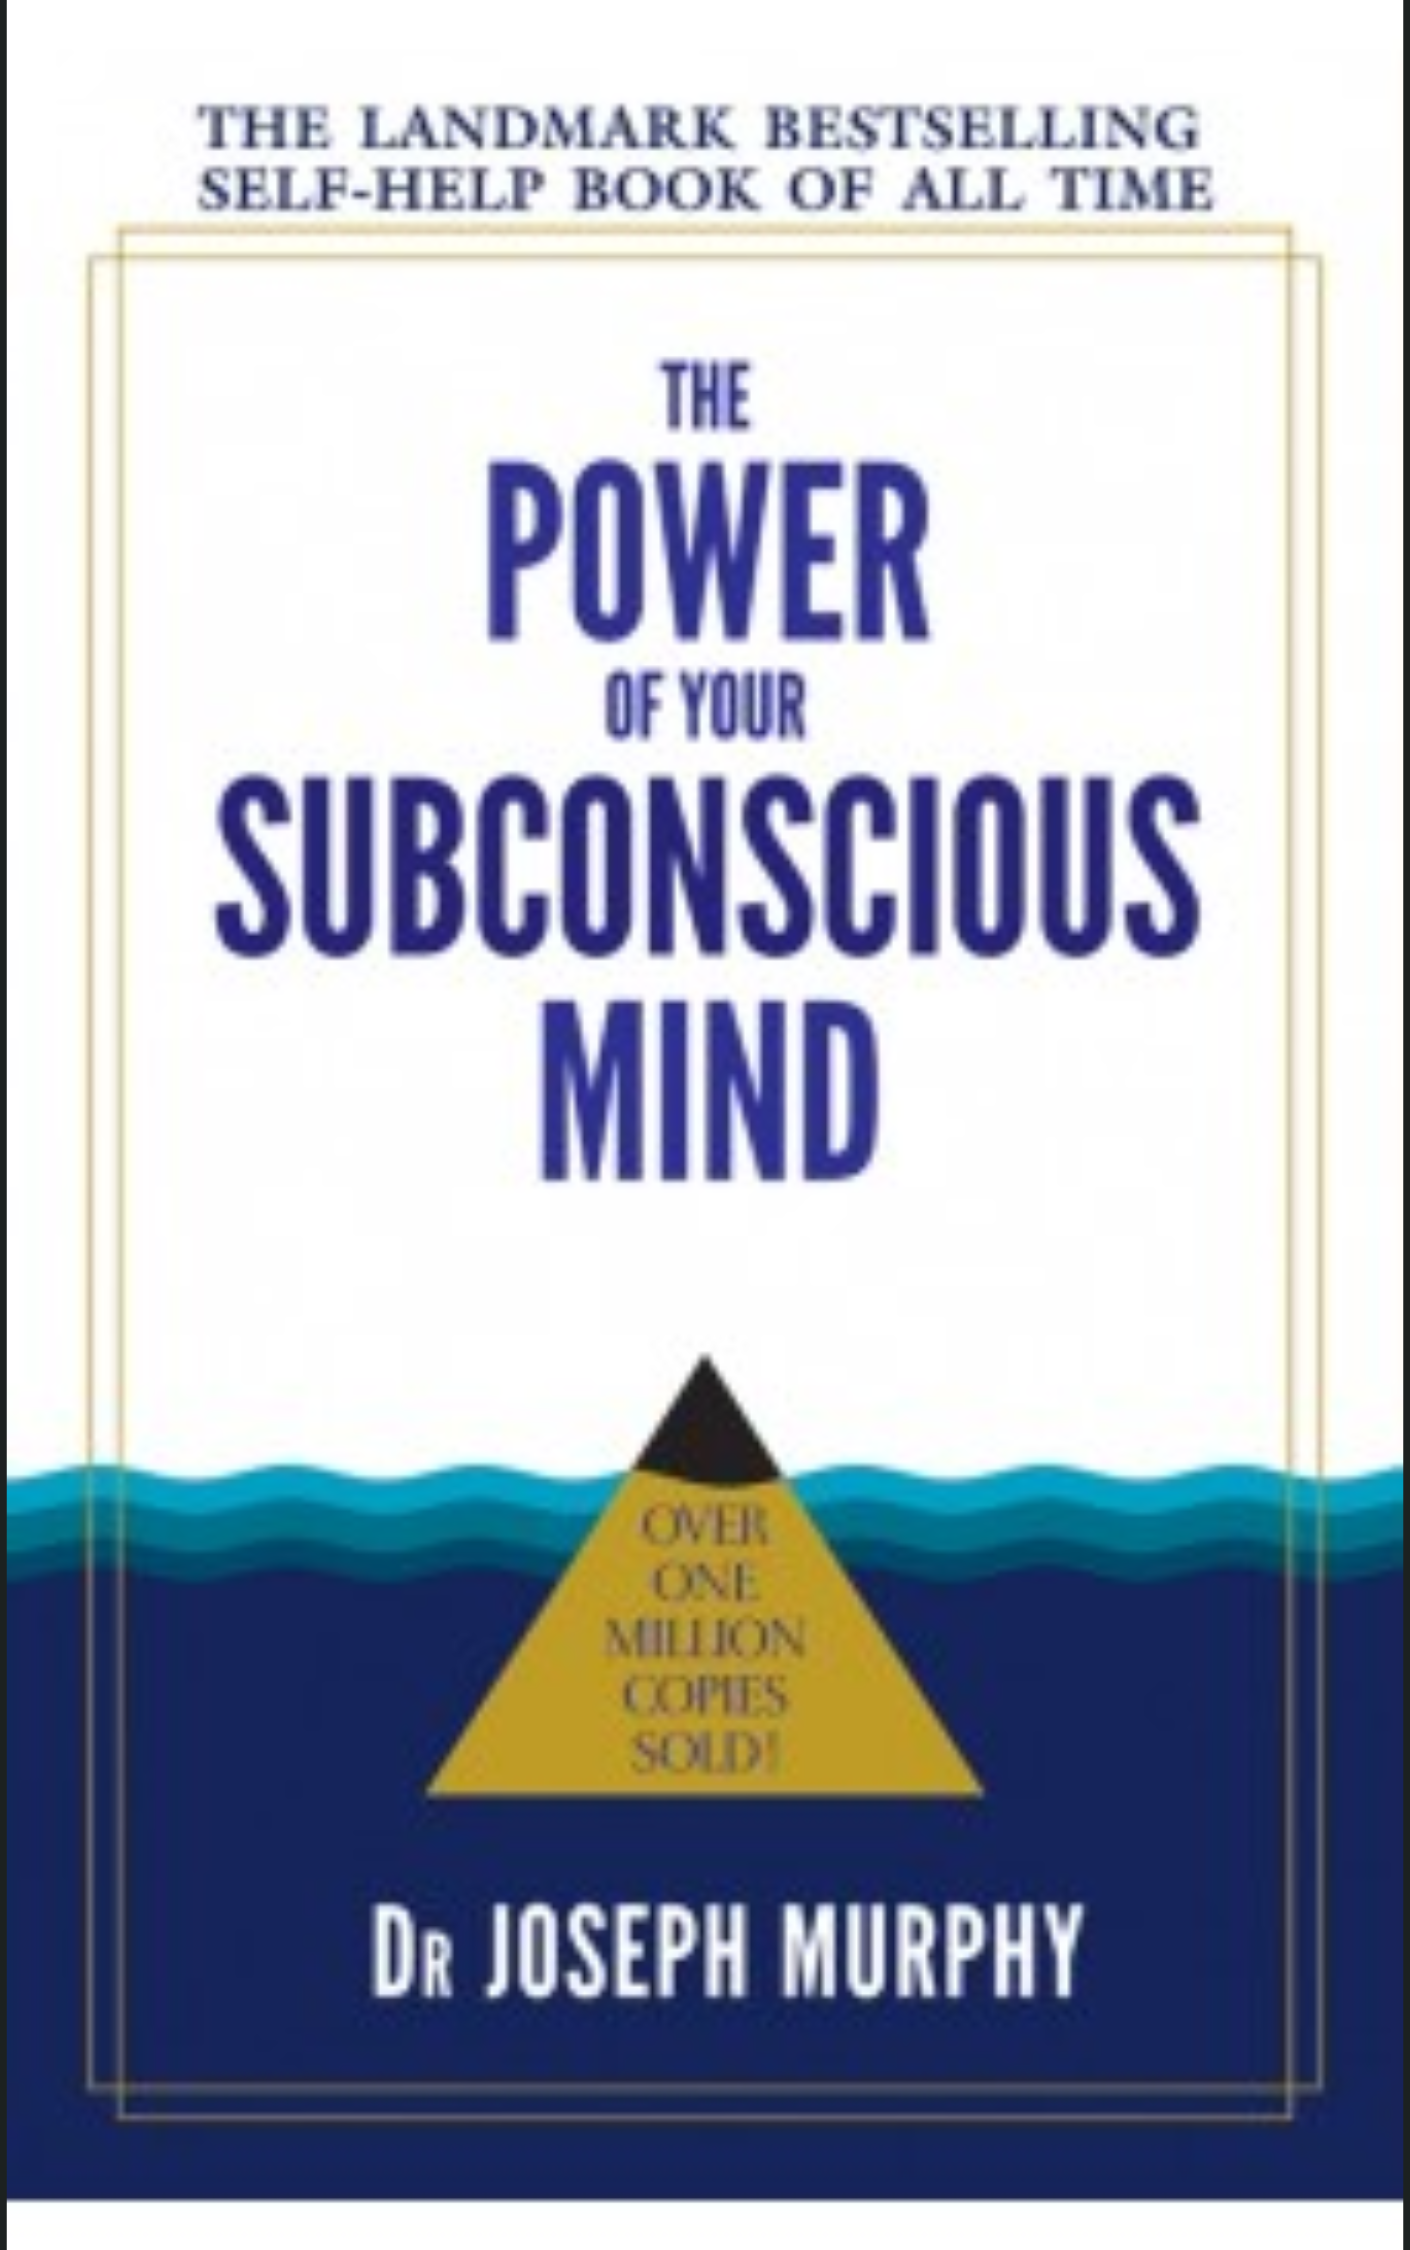 THE POWER OF YOUR SUBCONCIOUS MIND by DR. JOSEPH MURPHY